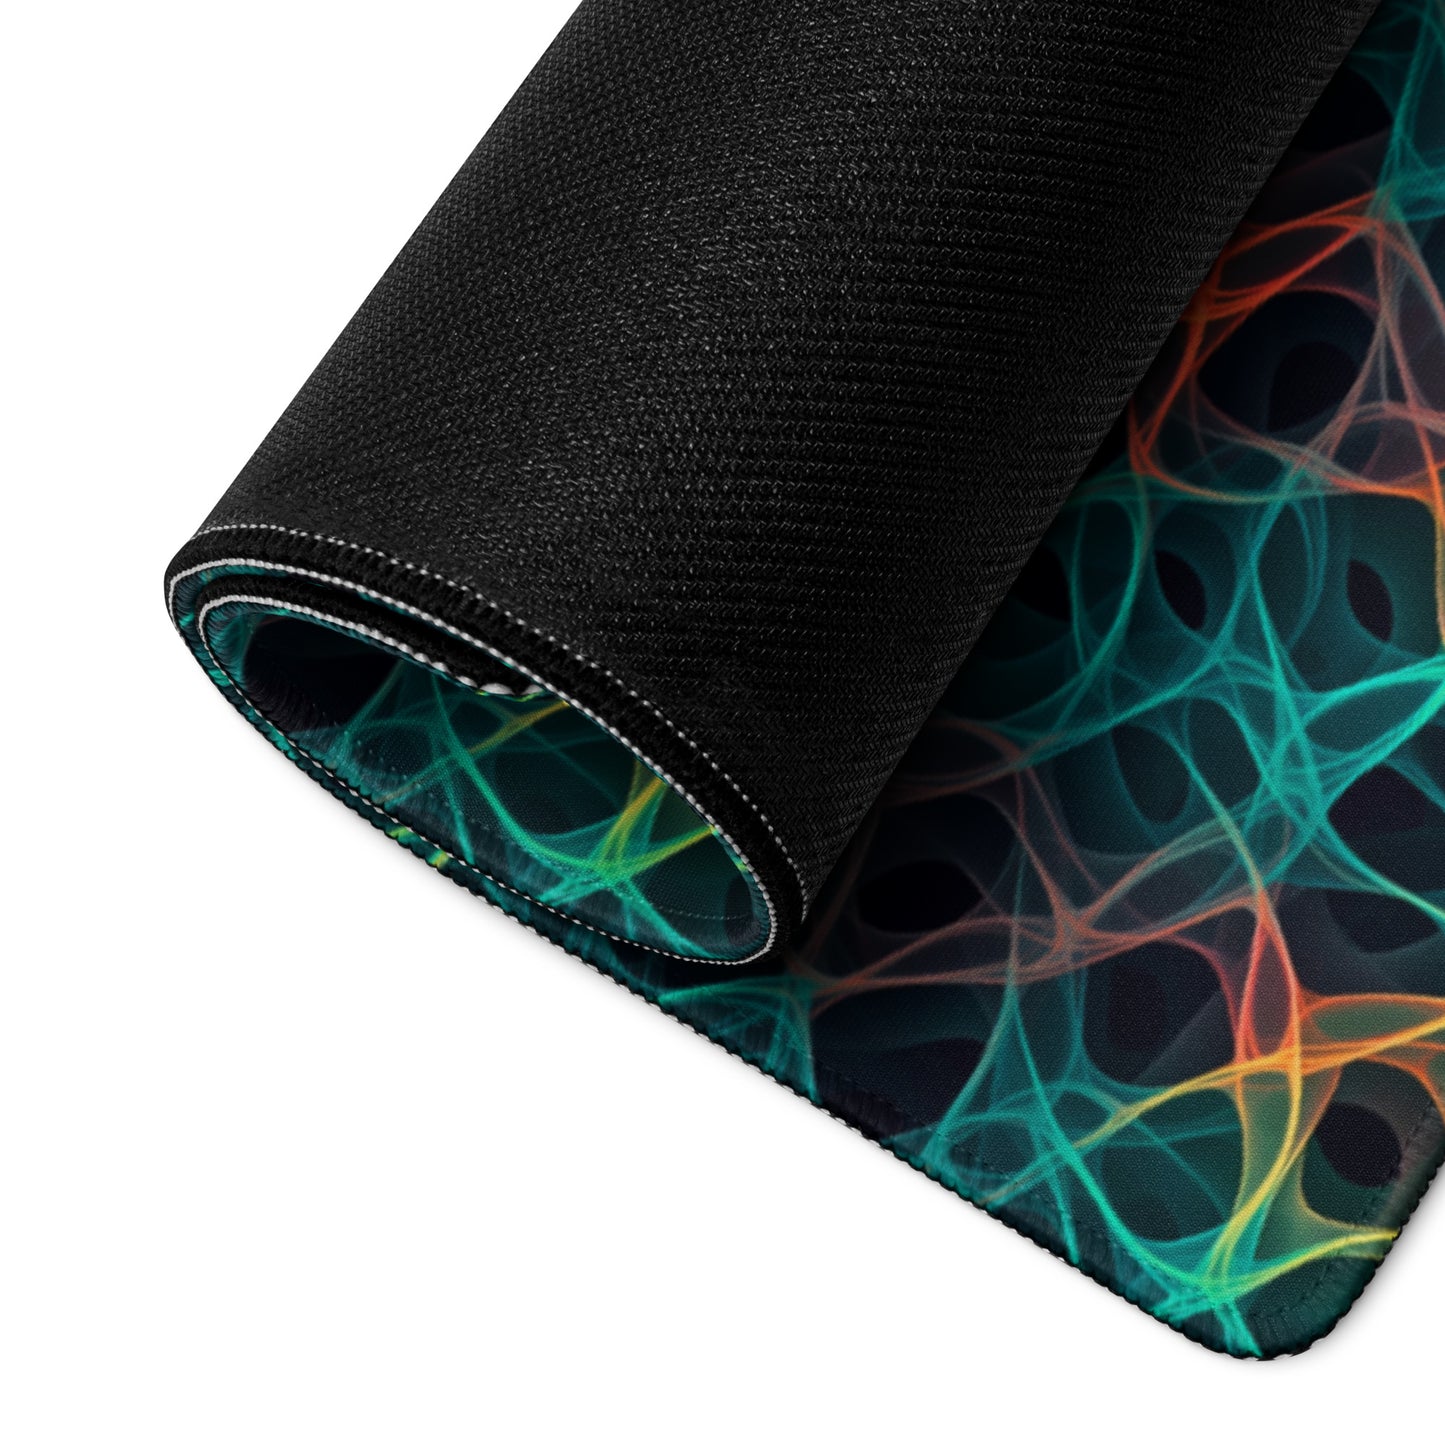 A 36" x 18" desk pad with an abstract pattern resembling a cell structure on it rolled up. Rainbow in color.